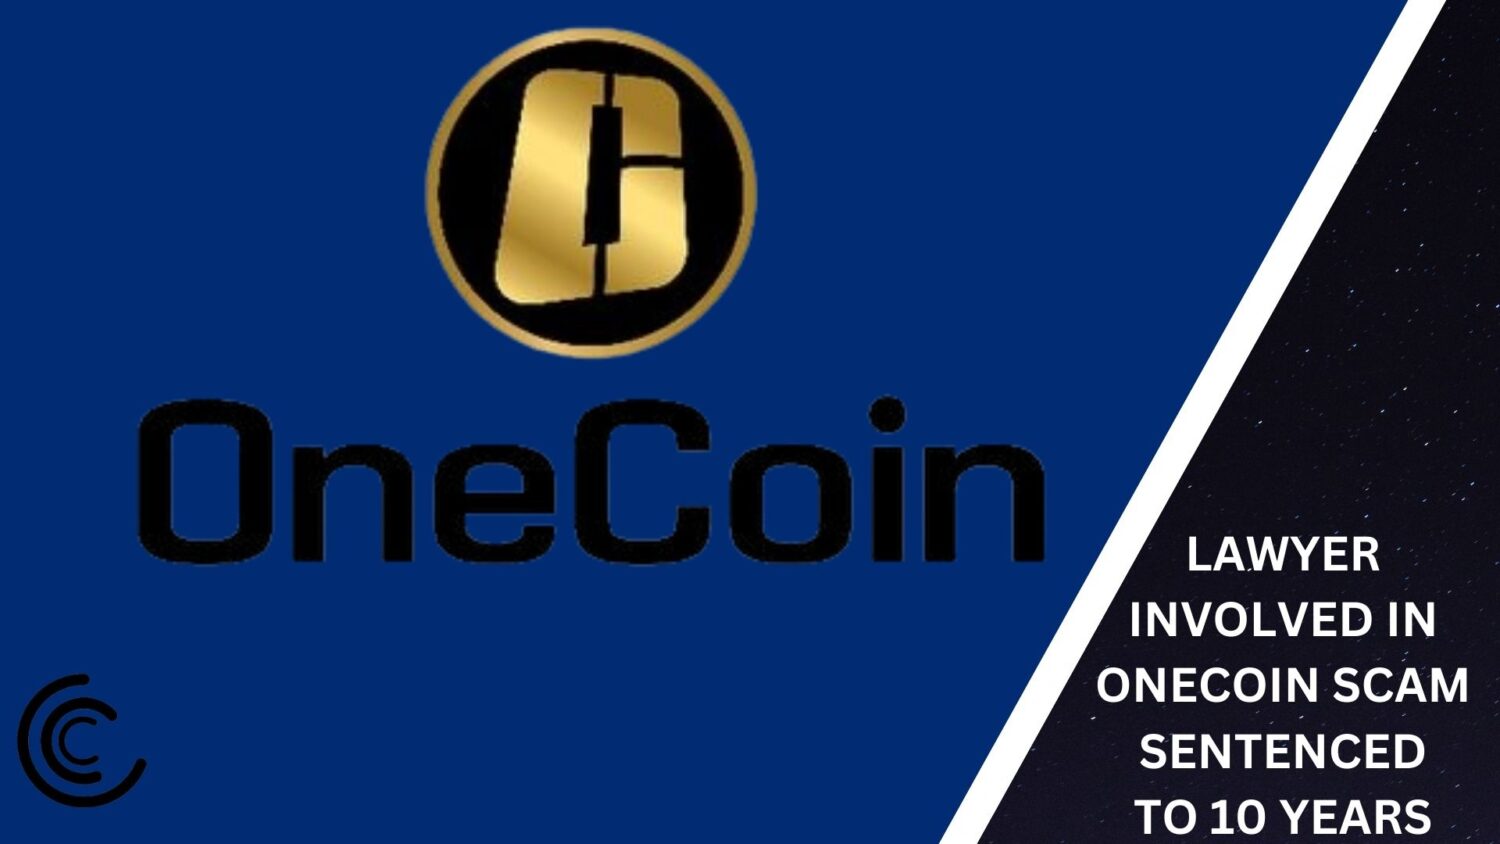 Lawyer Involved In Onecoin Money Laundering Scheme Sentenced To 10 Years